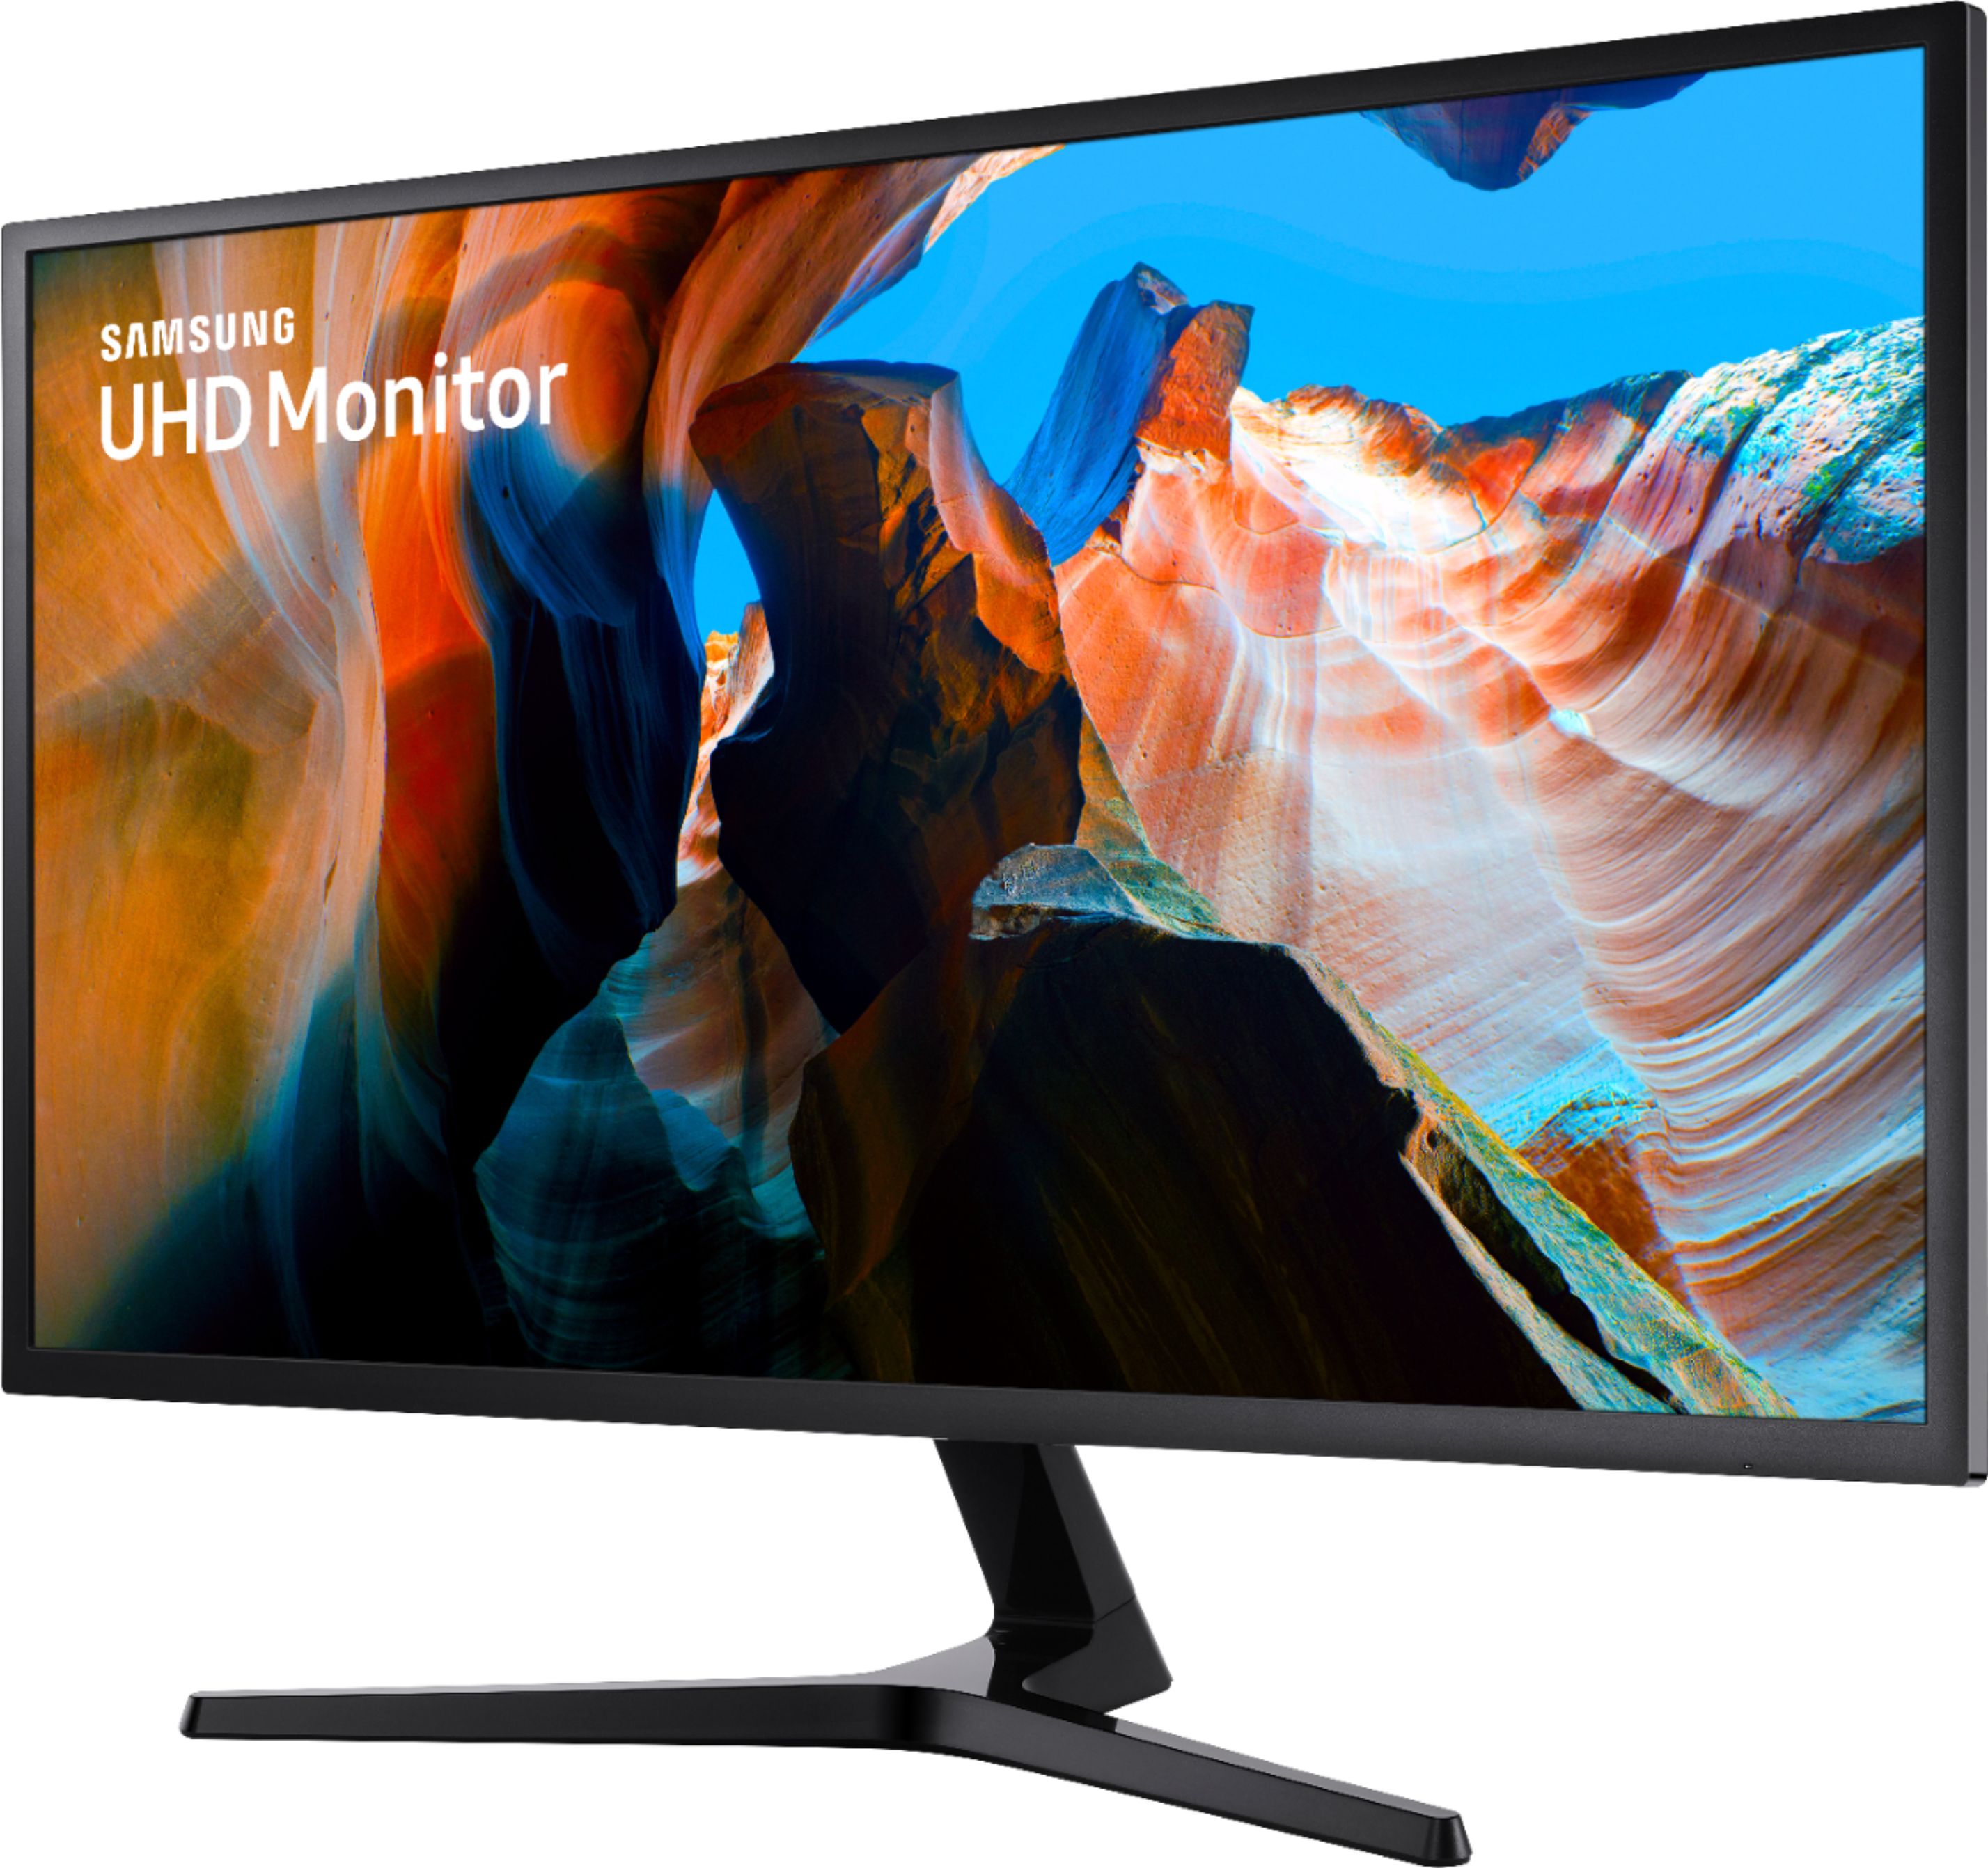 Left View: Samsung - G77 Series  32" Curved WQHD Gaming Monitor With Special T1 Faker Design (HDMI, USB) - Black